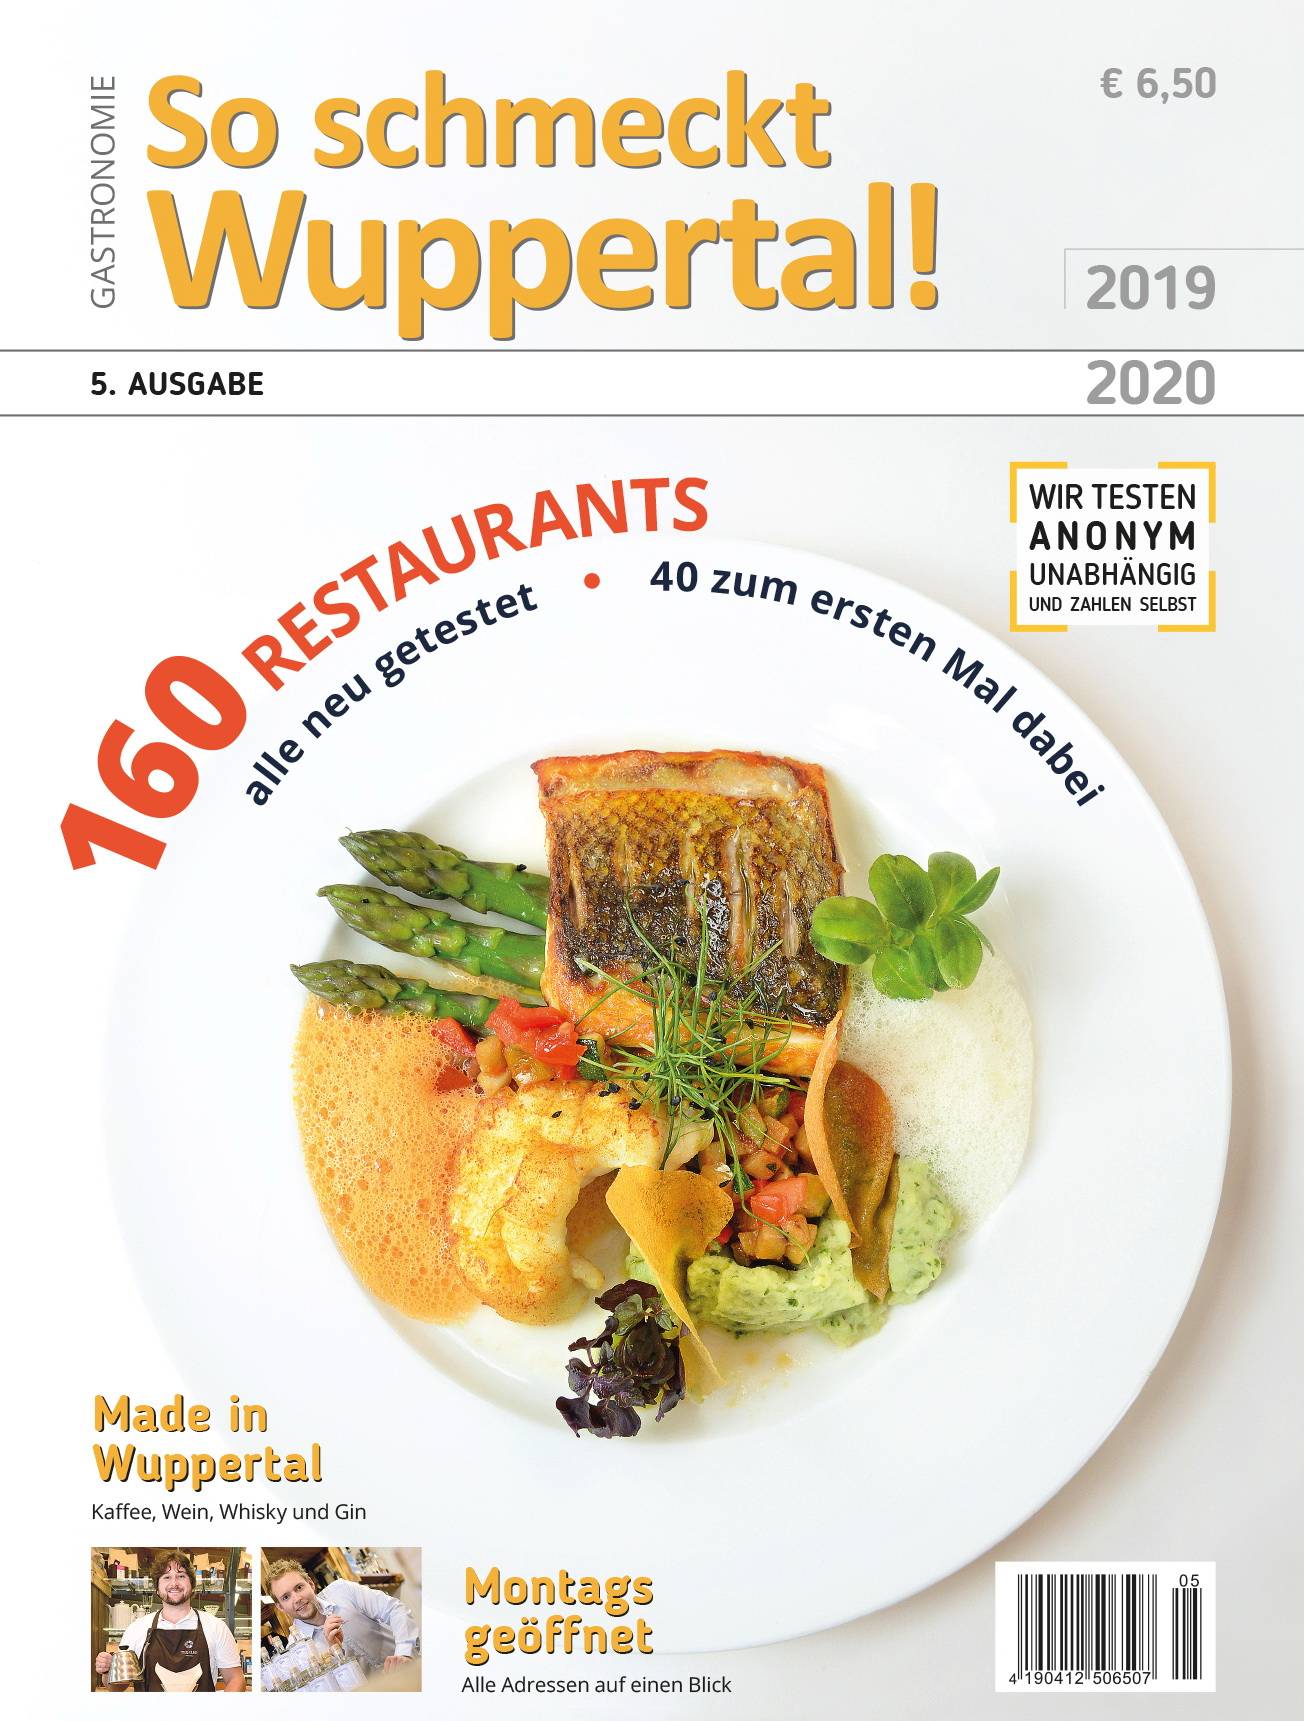 Wuppertaler Gastronomie: What’s new, what’s zu?